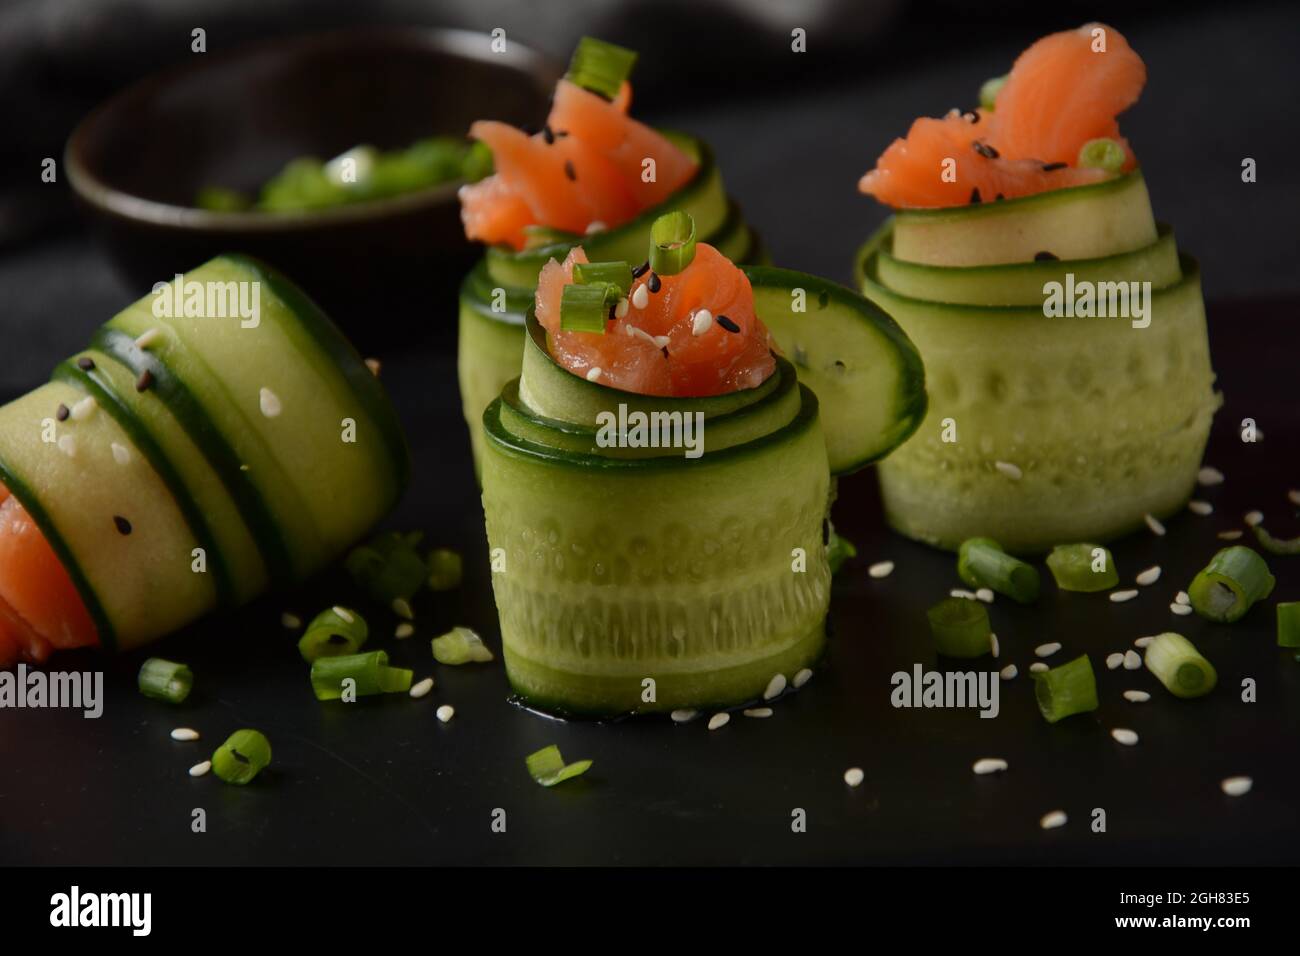 Cucumber rolls with pieces of salted salmon, black and white sesame seeds, chopped green onion. Holiday vegetable appetizers Stock Photo